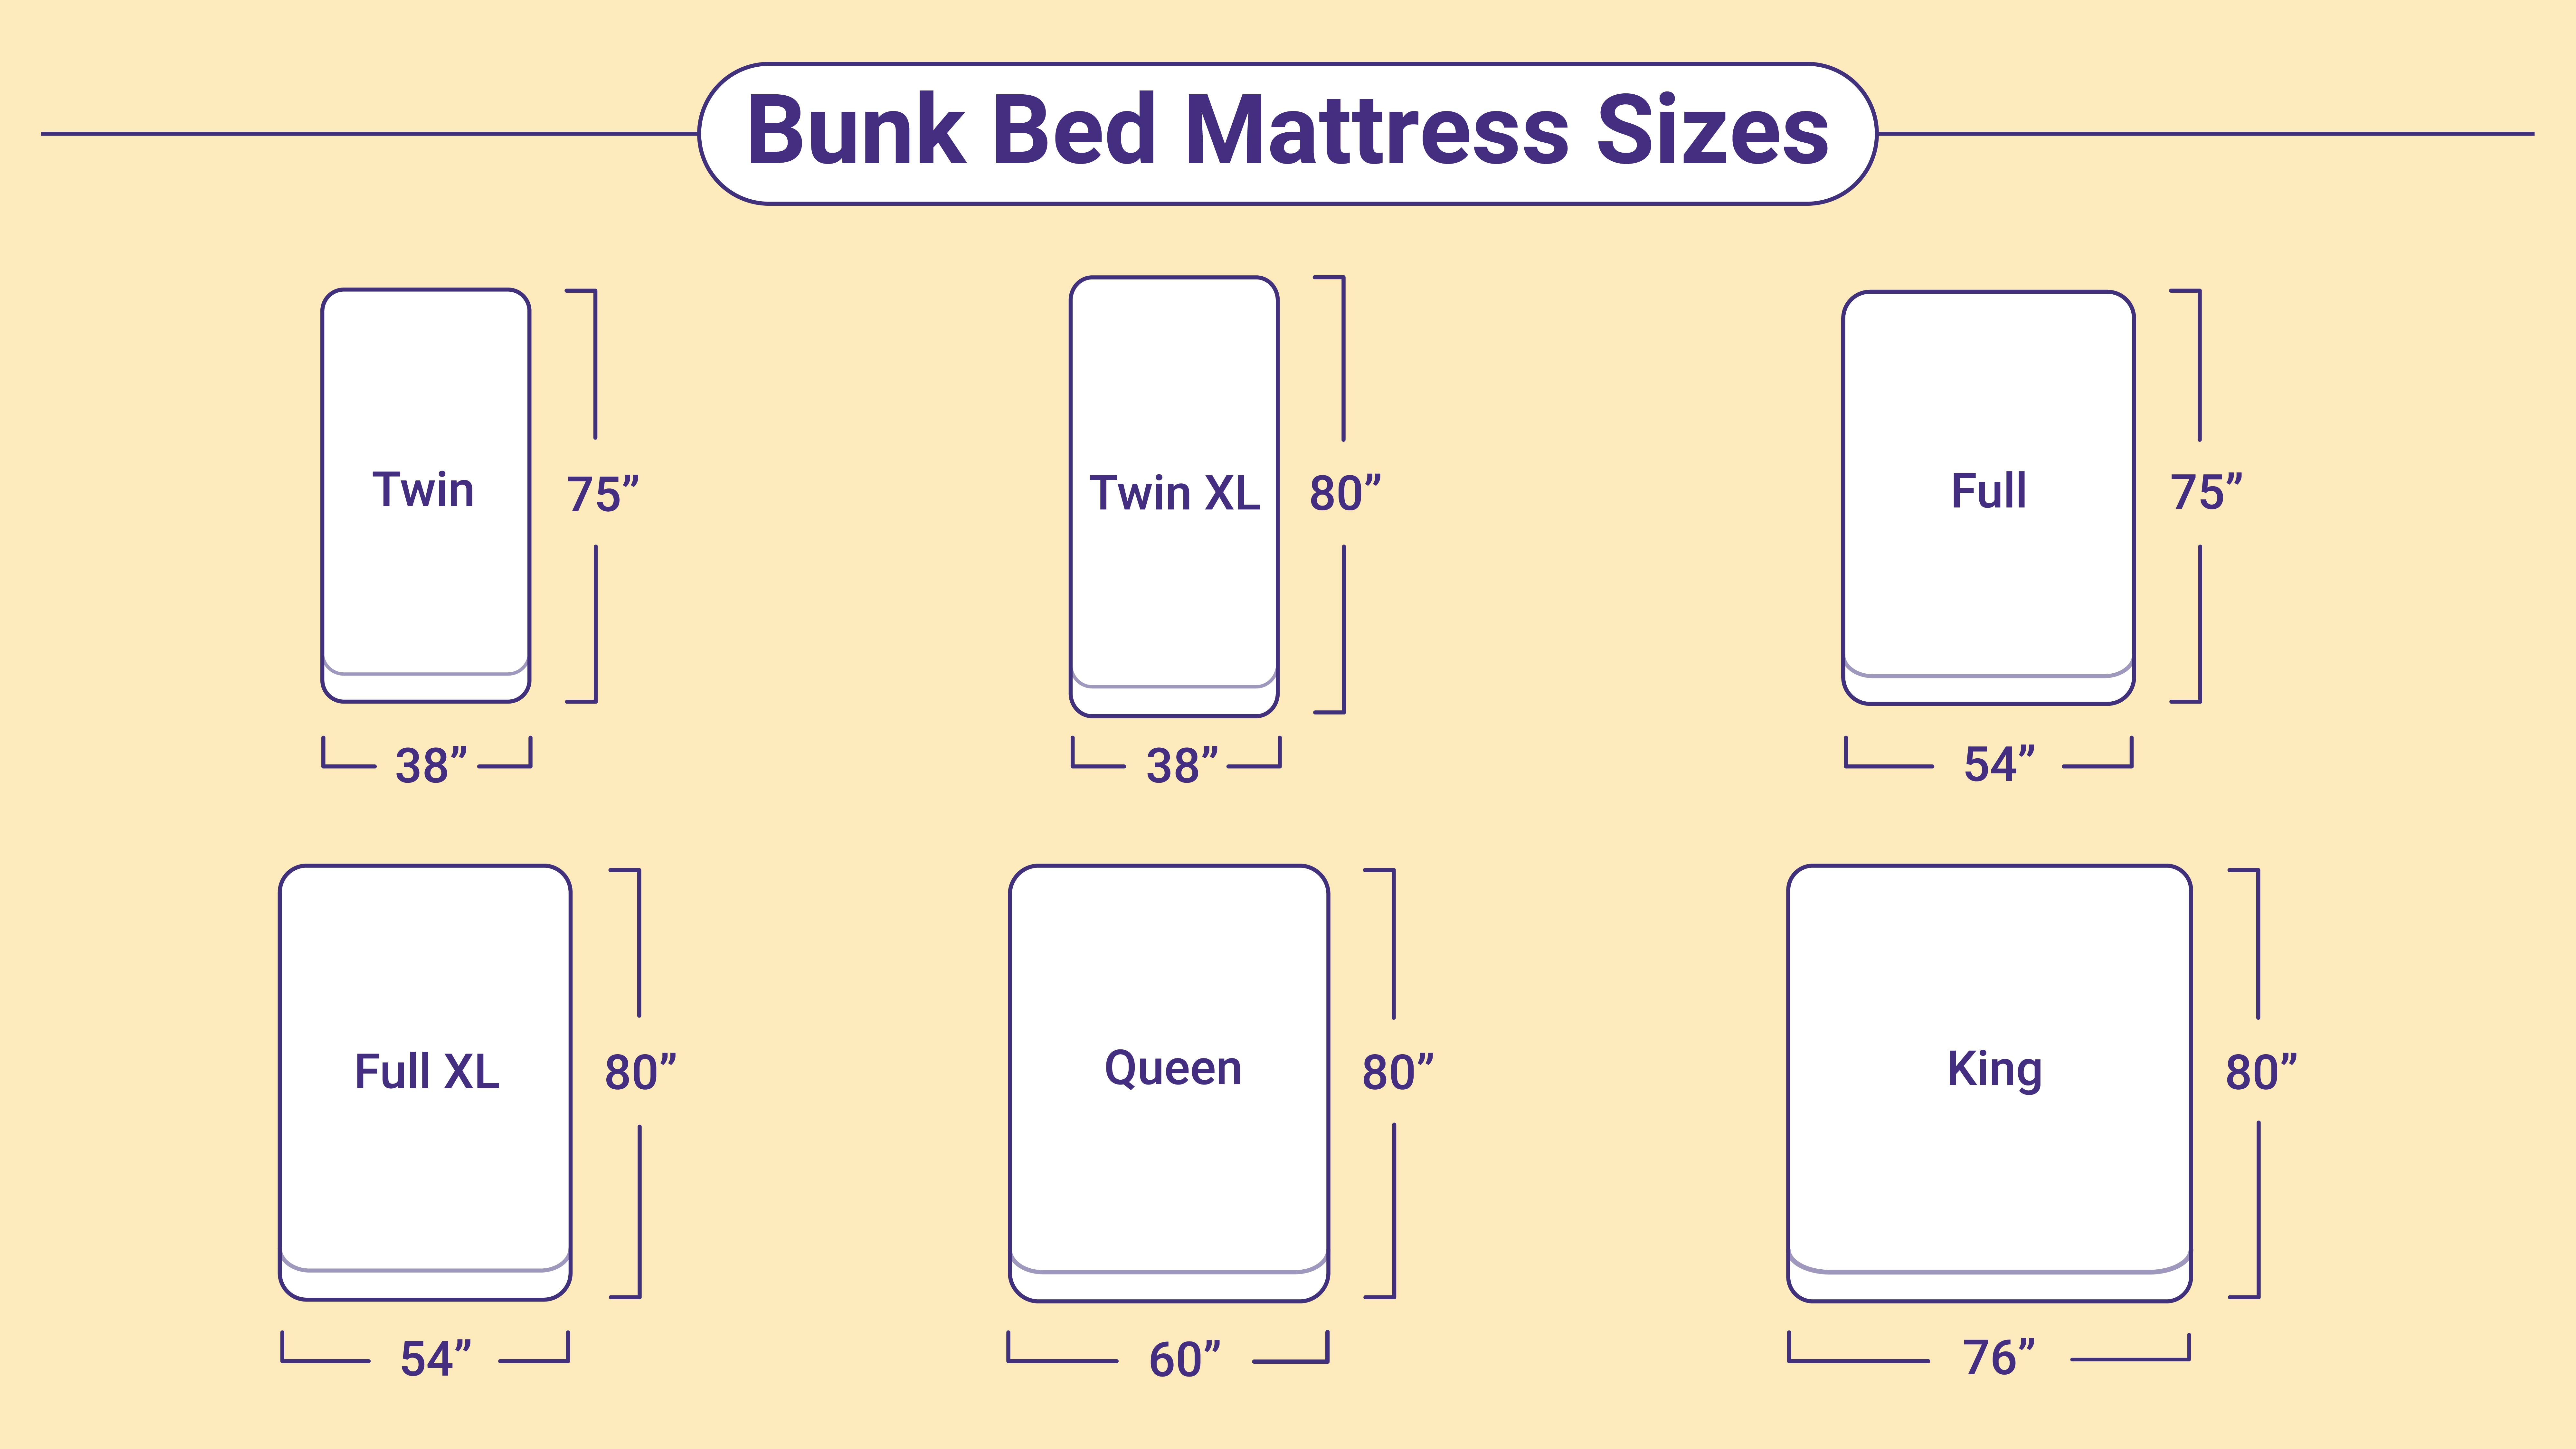 Bunk Bed Mattress Sizes And Dimensions, Full Size Bunk Bed Dimensions